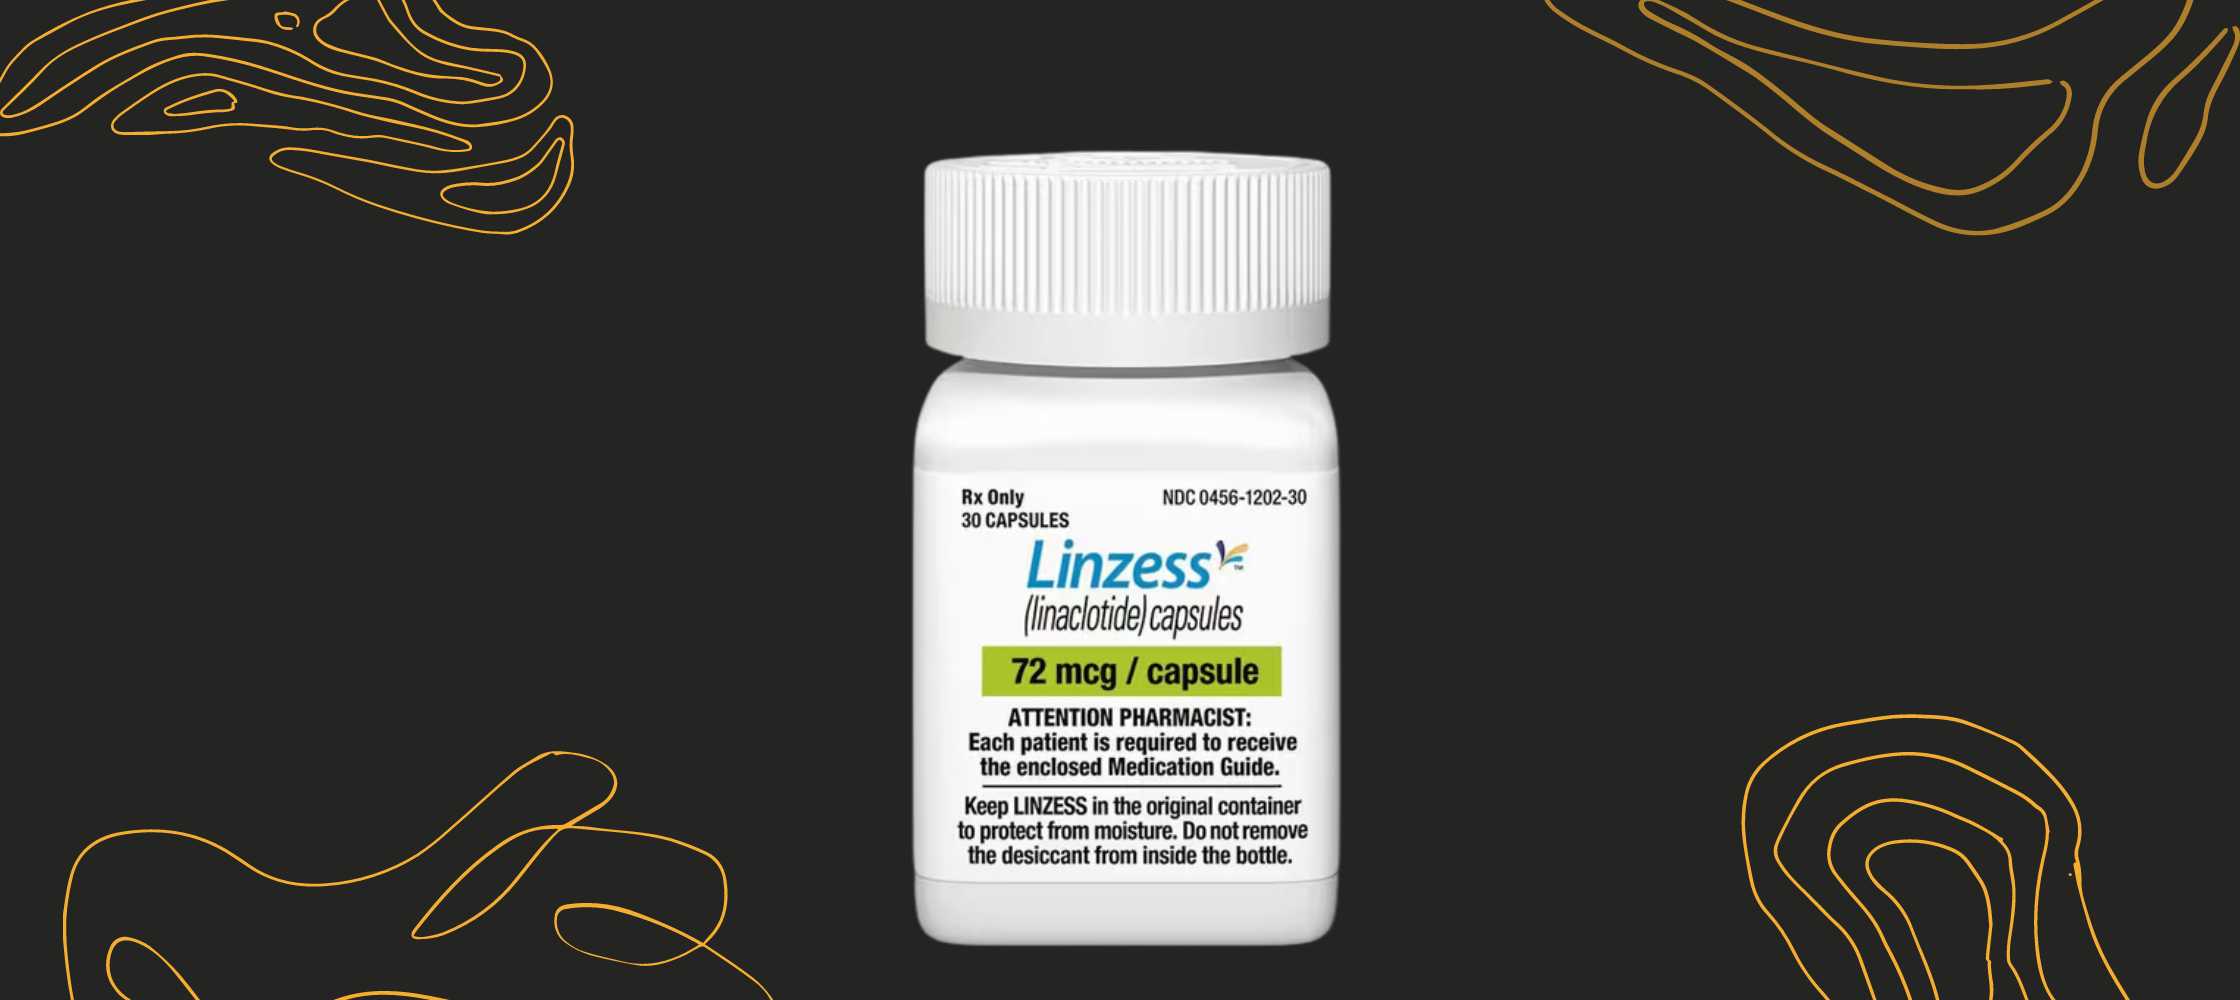 Linzess for Weight Loss